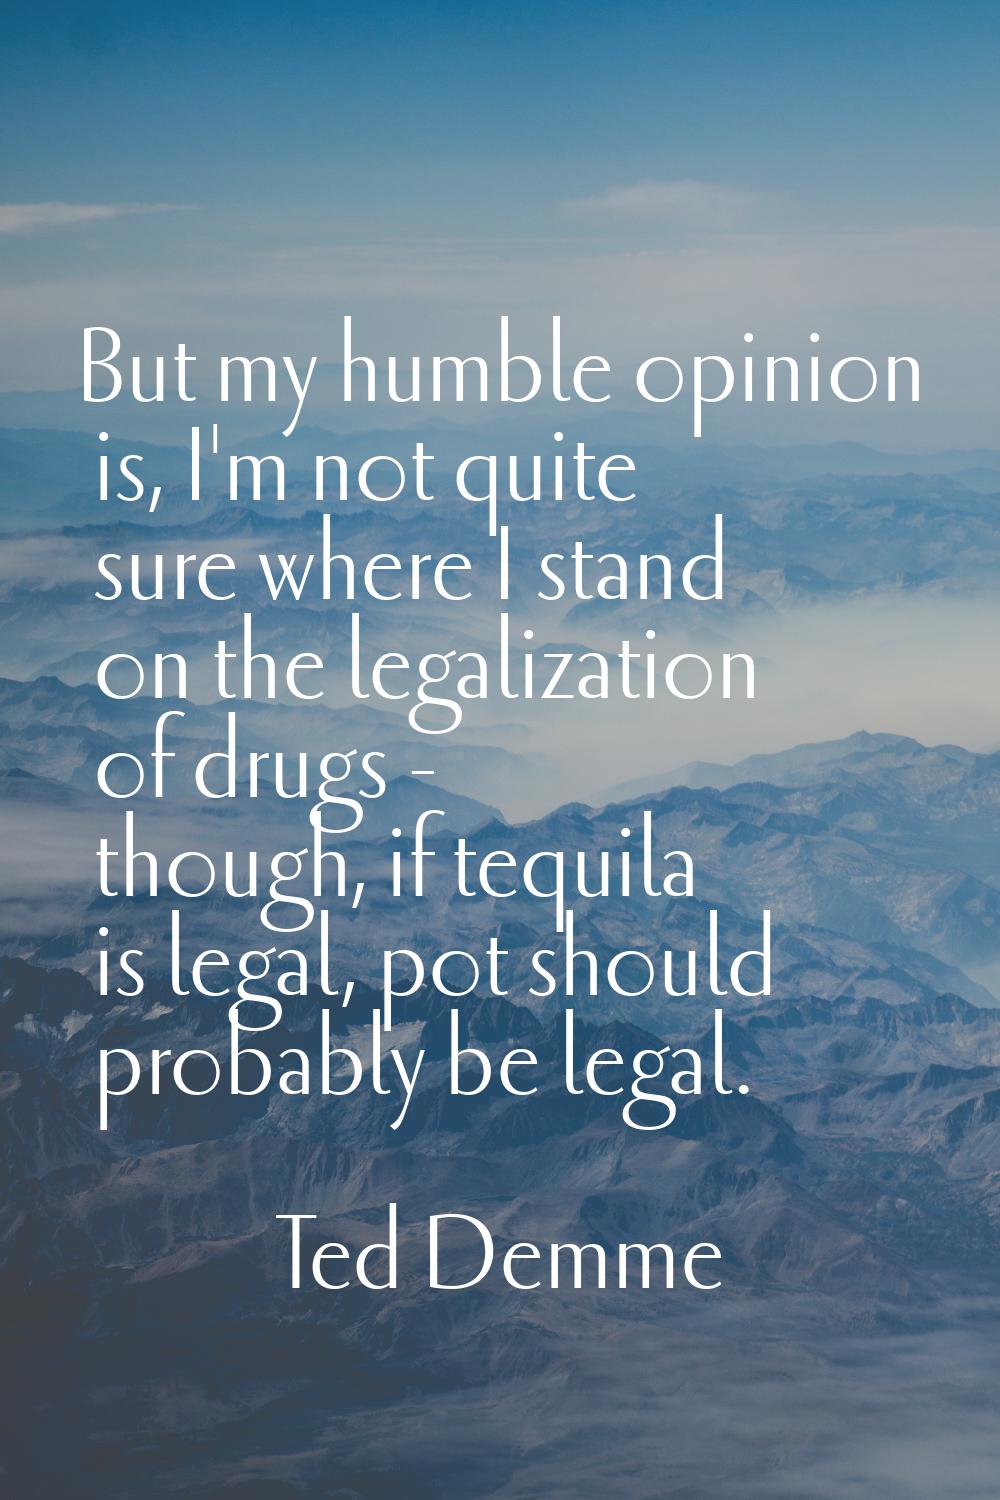 But my humble opinion is, I'm not quite sure where I stand on the legalization of drugs - though, i